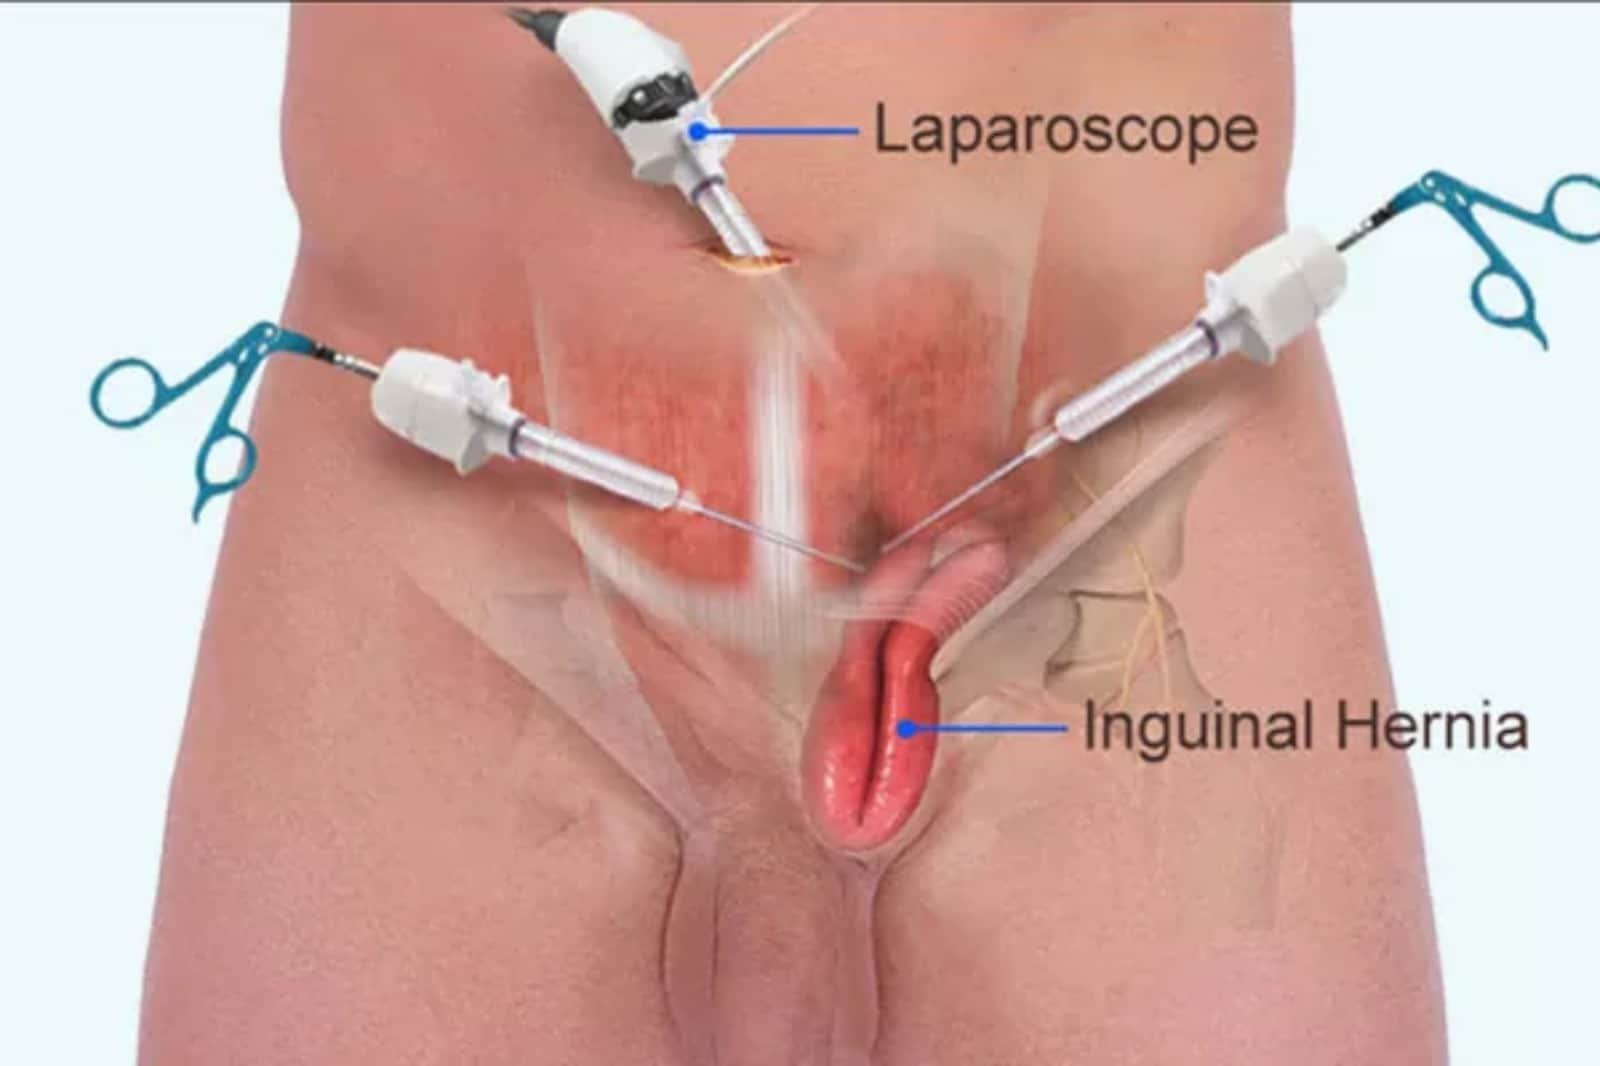 Recovery Timeline after Laparoscopic Hernia Repair